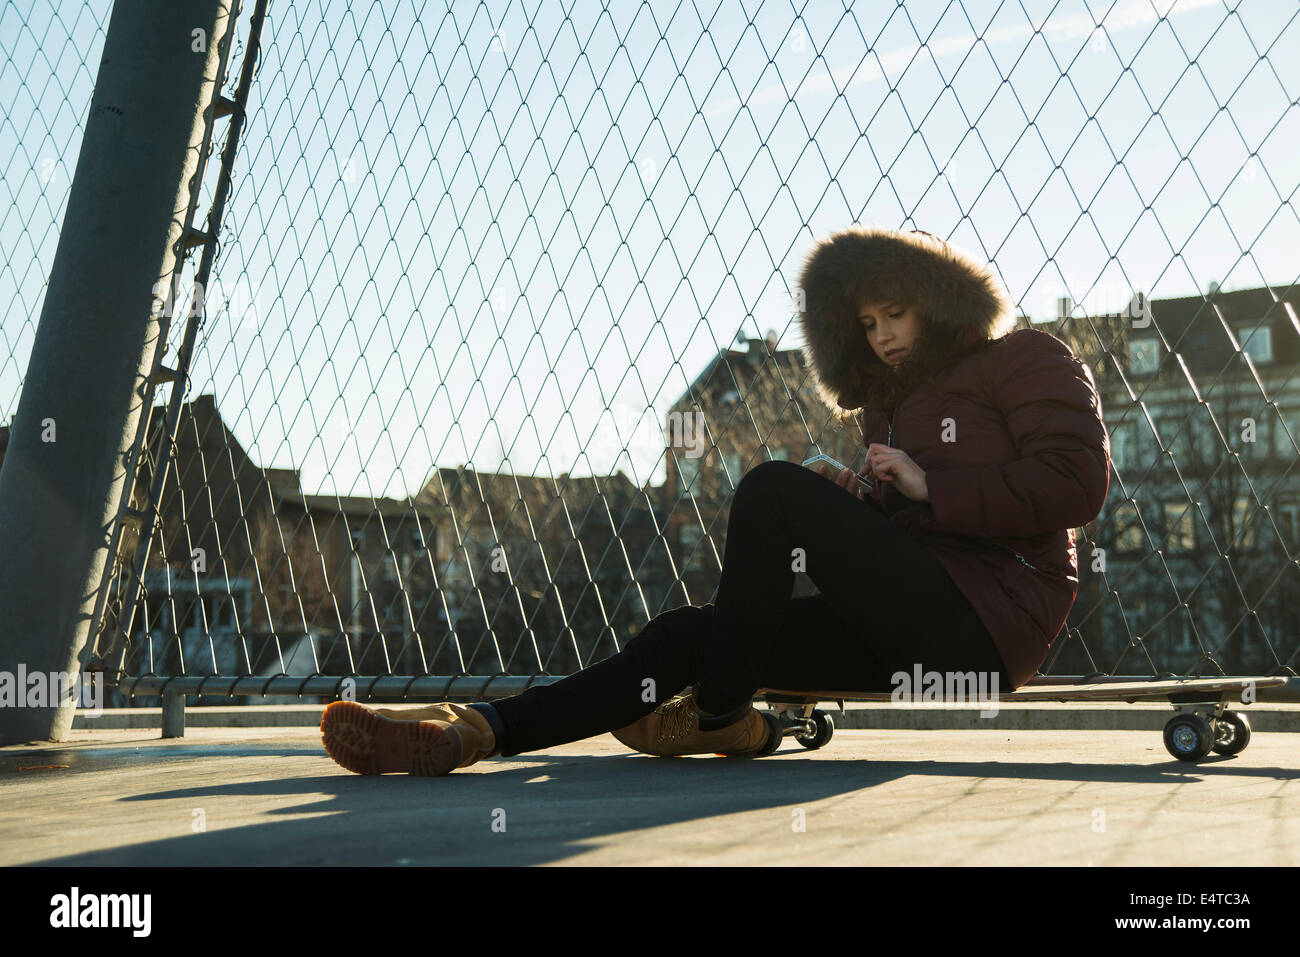 Teenage girl sitting on skateboard next to chain link fence near comercial dock, wearing winter coat, using smart phone, Germany Stock Photo